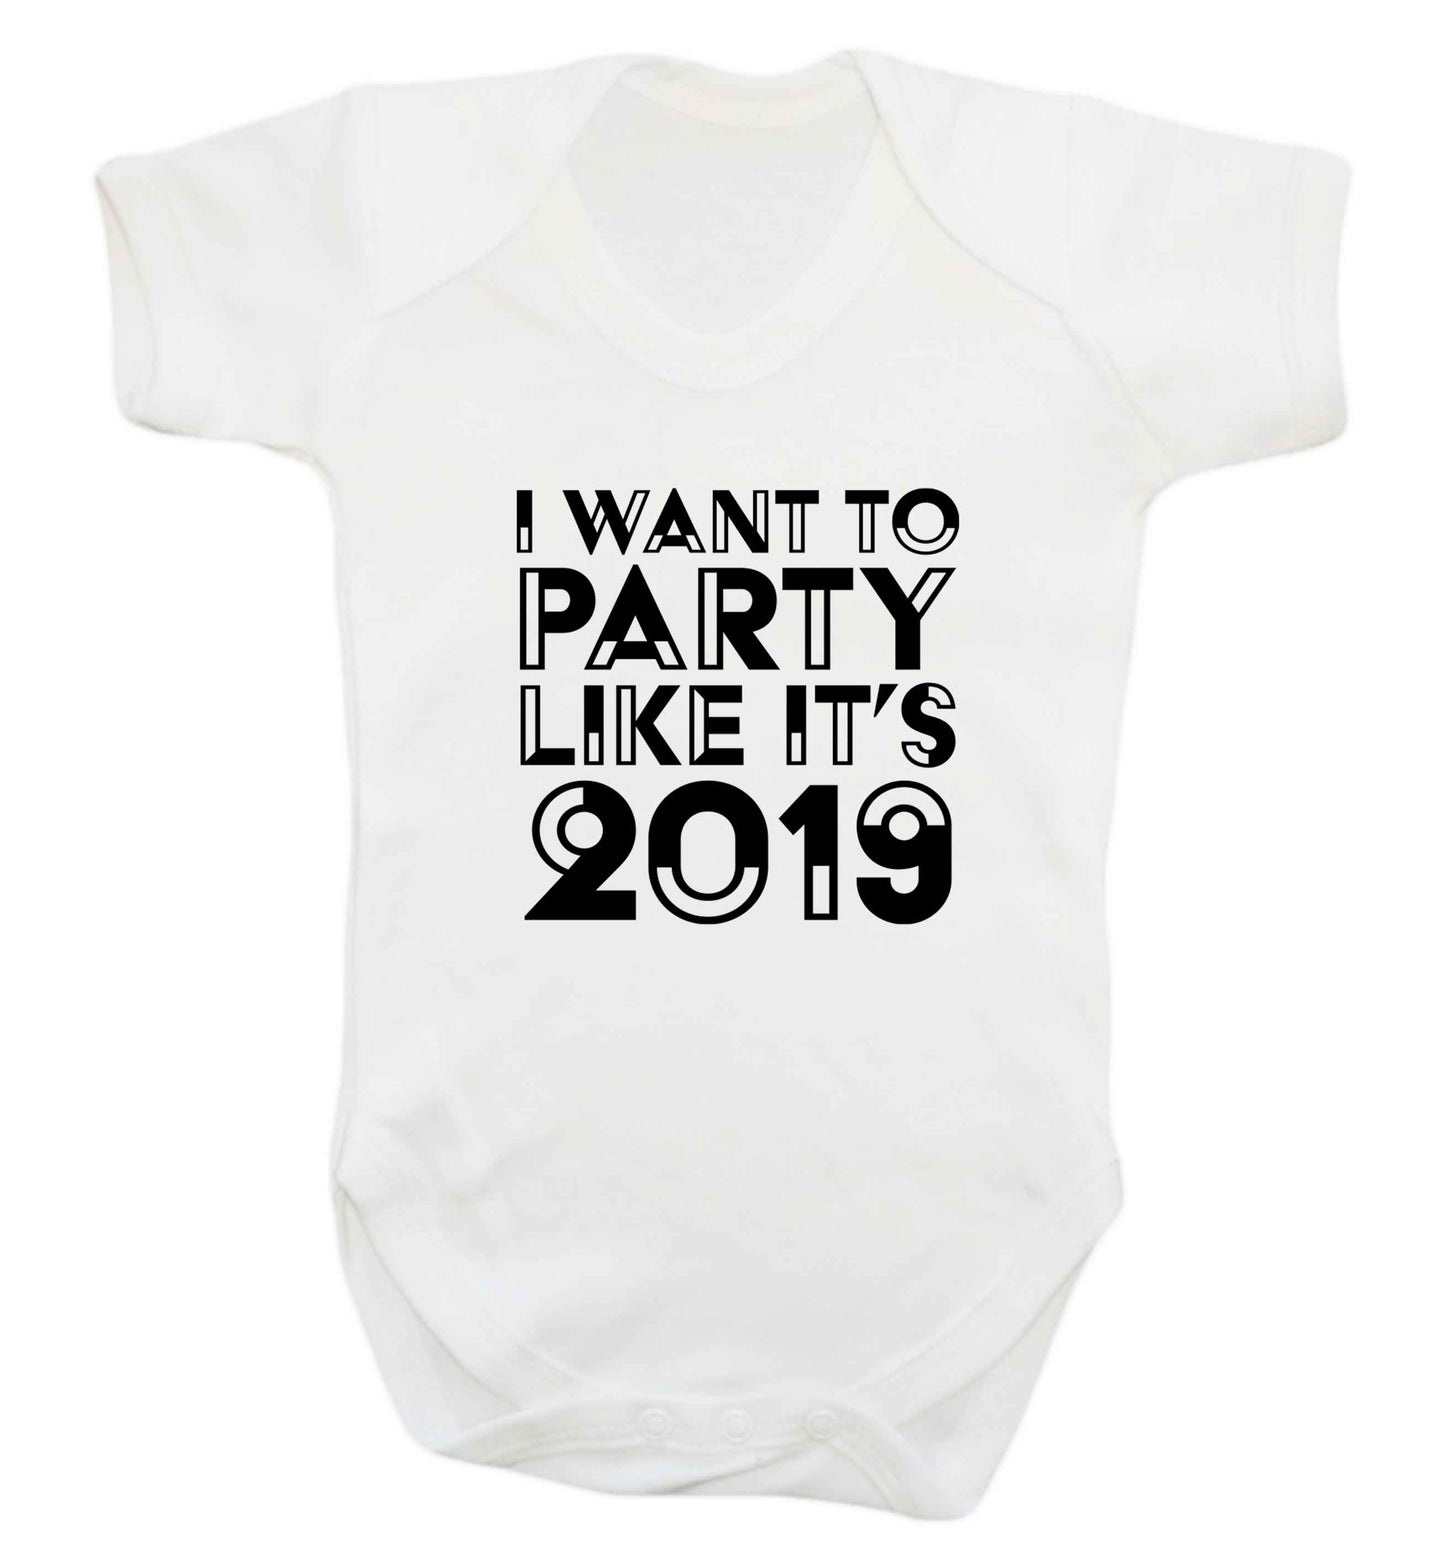 I want to party like it's 2019 baby vest white 18-24 months